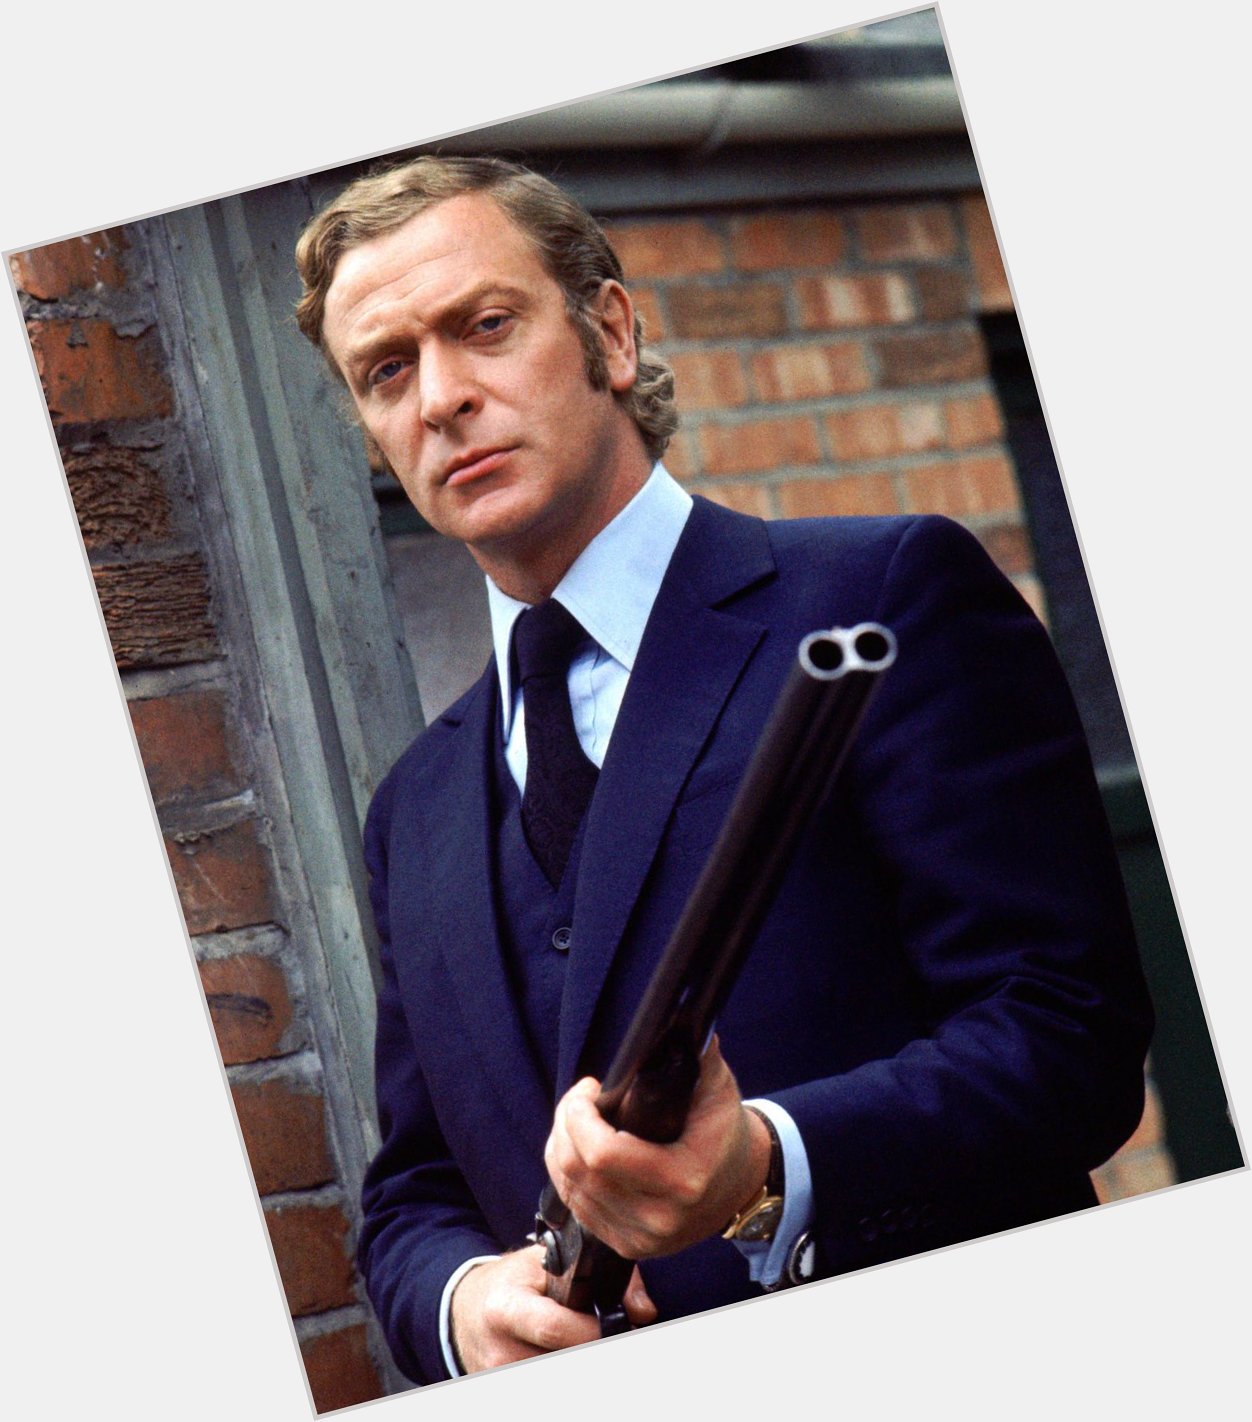 Happy birthday, Michael Caine, you incorrigible legend, you! 